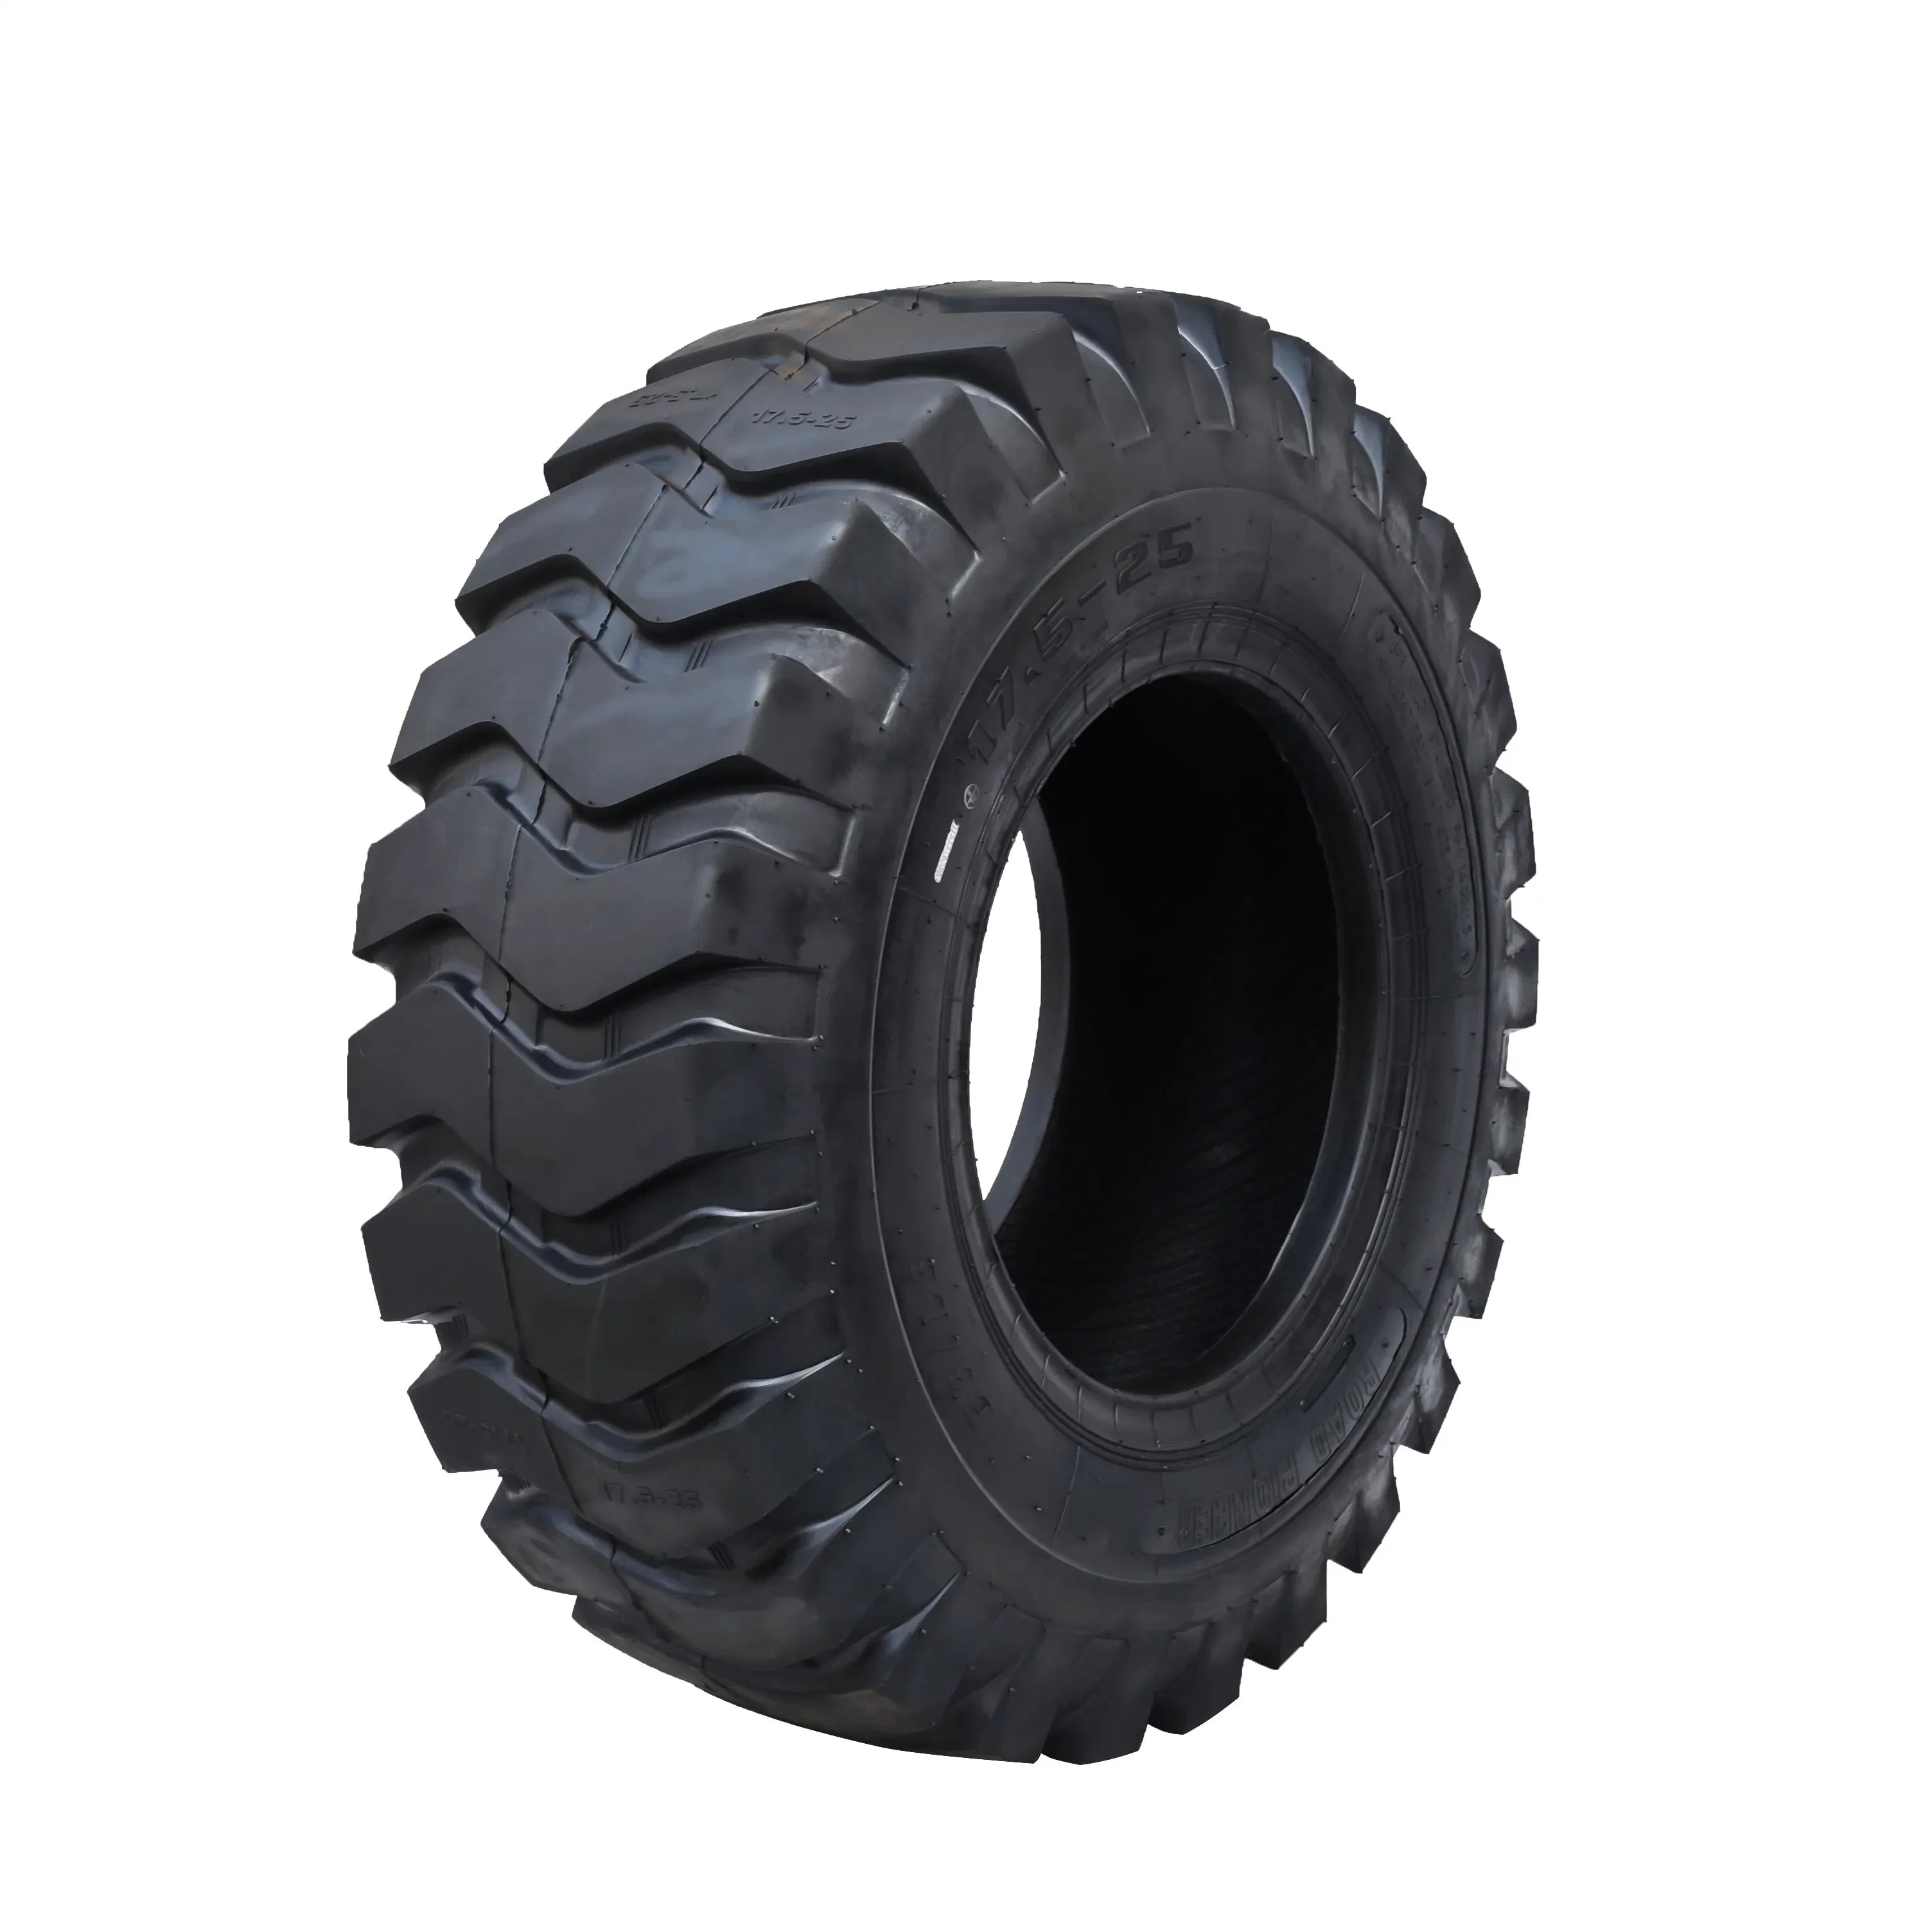 High Quality Cheap OTR Large Radial OTR Solid Tire 20.5r25 23.5r25 26.5r25 Mining Truck Tire for Loaders